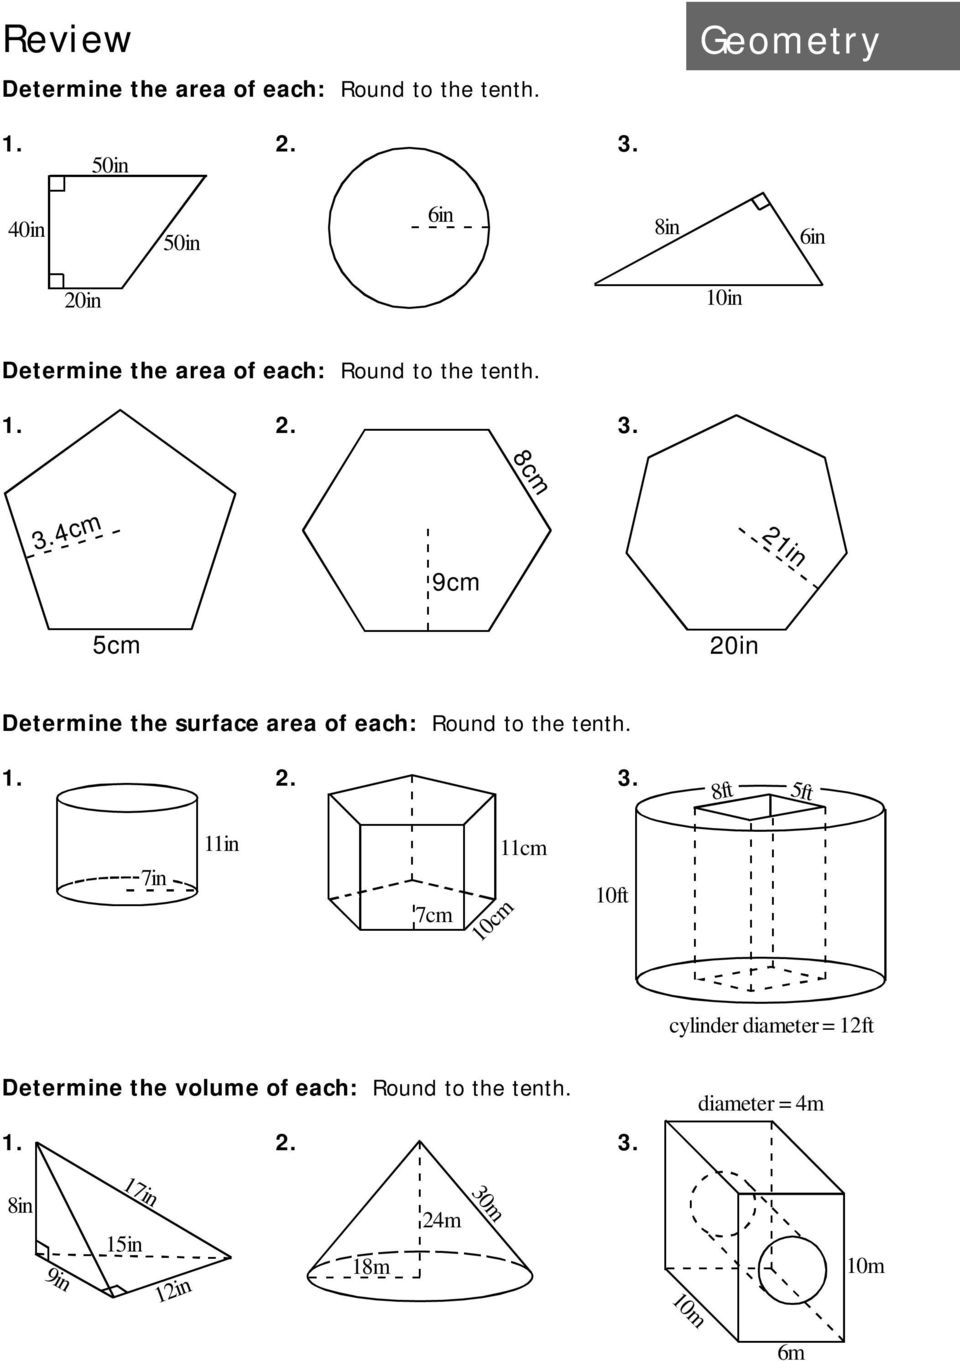 4cm 9cm 21in 5cm 20in Determine the surface area of each: Round to the tenth. 1. 2. 3.